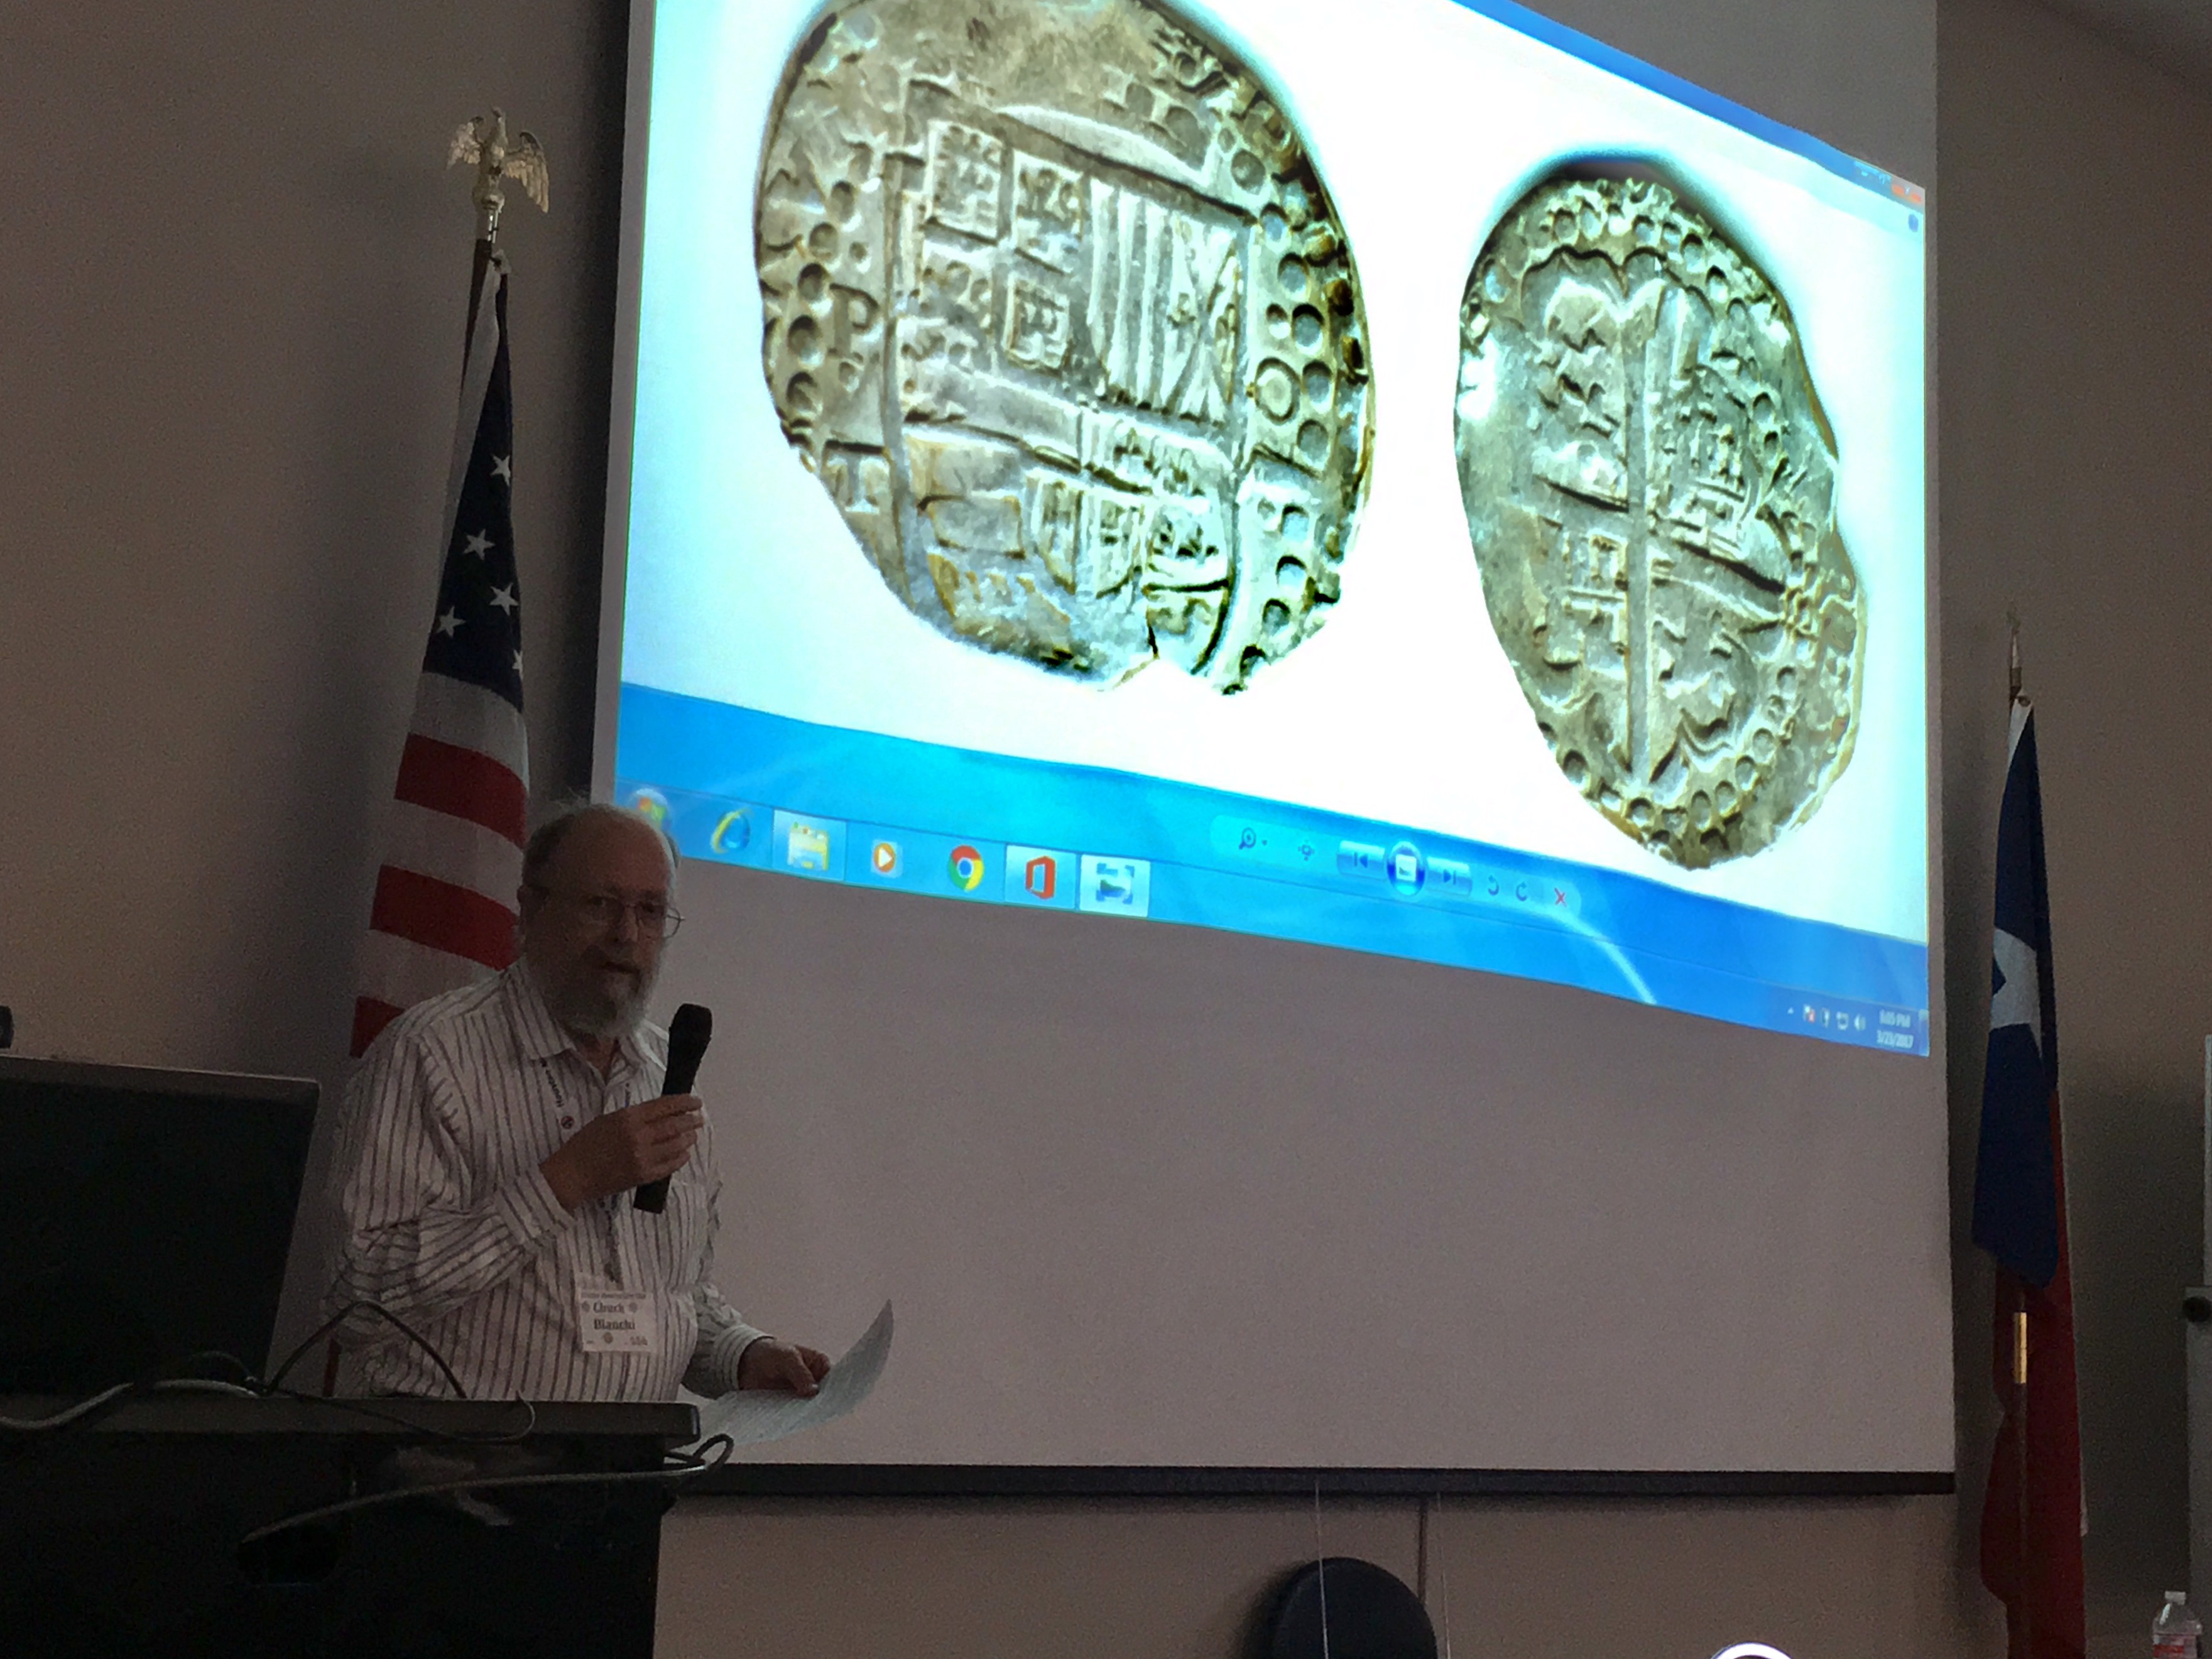 GHCC club member David "Chuck" Bianchi assists Mr. de Leon Tallavas with his presentation about the 1st Intl. Convention of Historians & Numismatists at the march 2017 club meeting